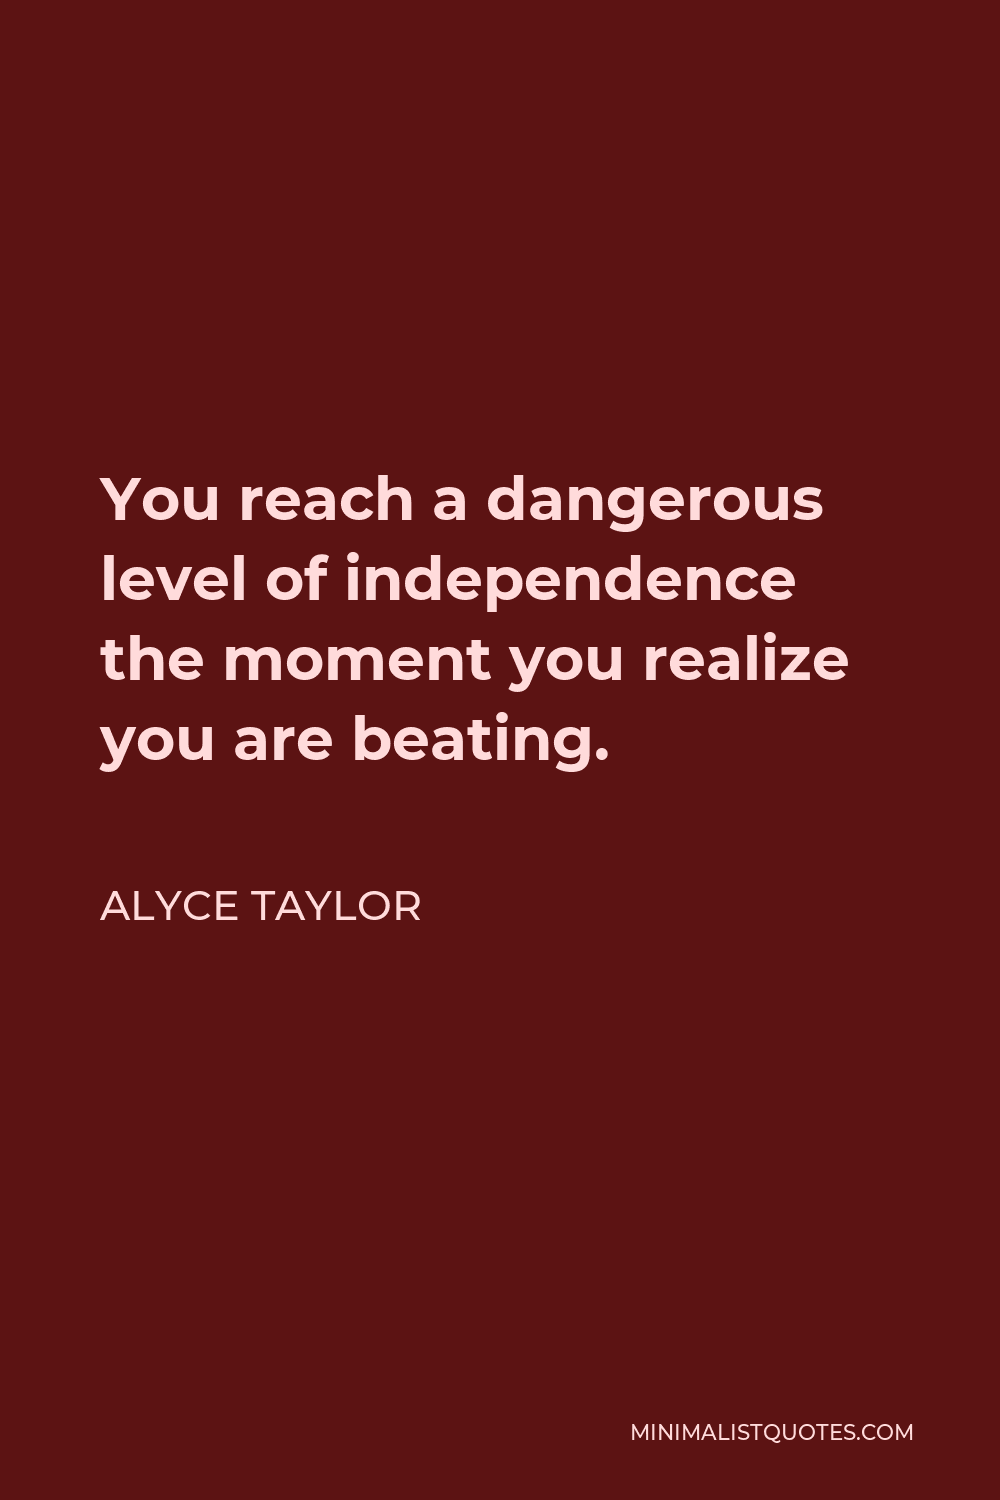 Alyce Taylor Quote - You reach a dangerous level of independence the moment you realize you are beating.